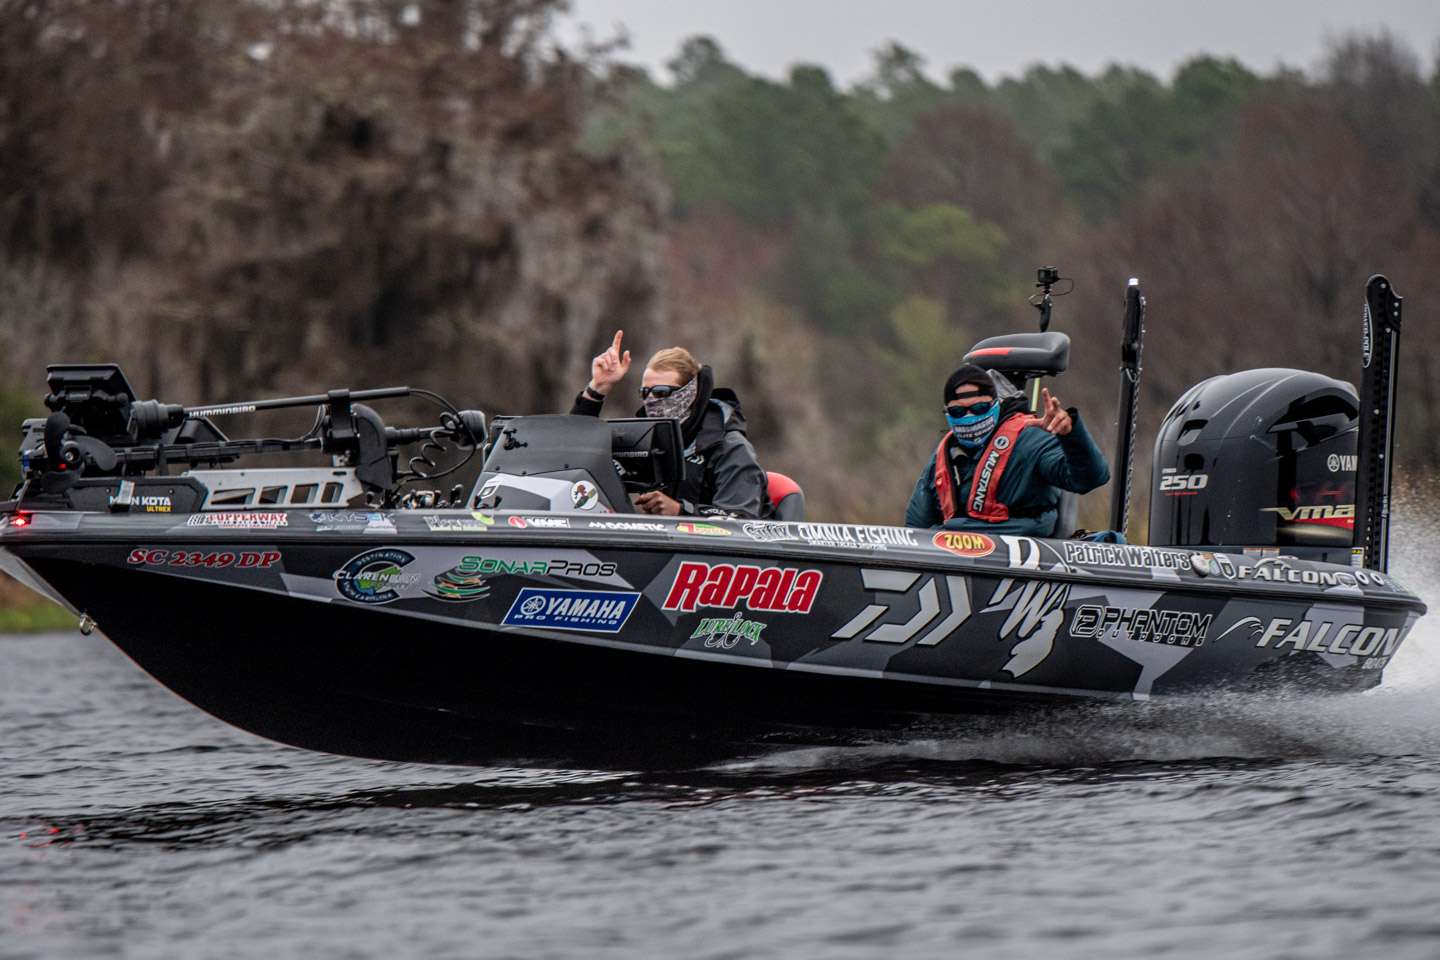 Take a look at Day 3 leader Patrick Walters as he tries to take home another blue trophy on Championship Sunday at the AFTCO Bassmaster Elite at St. Johns River. 